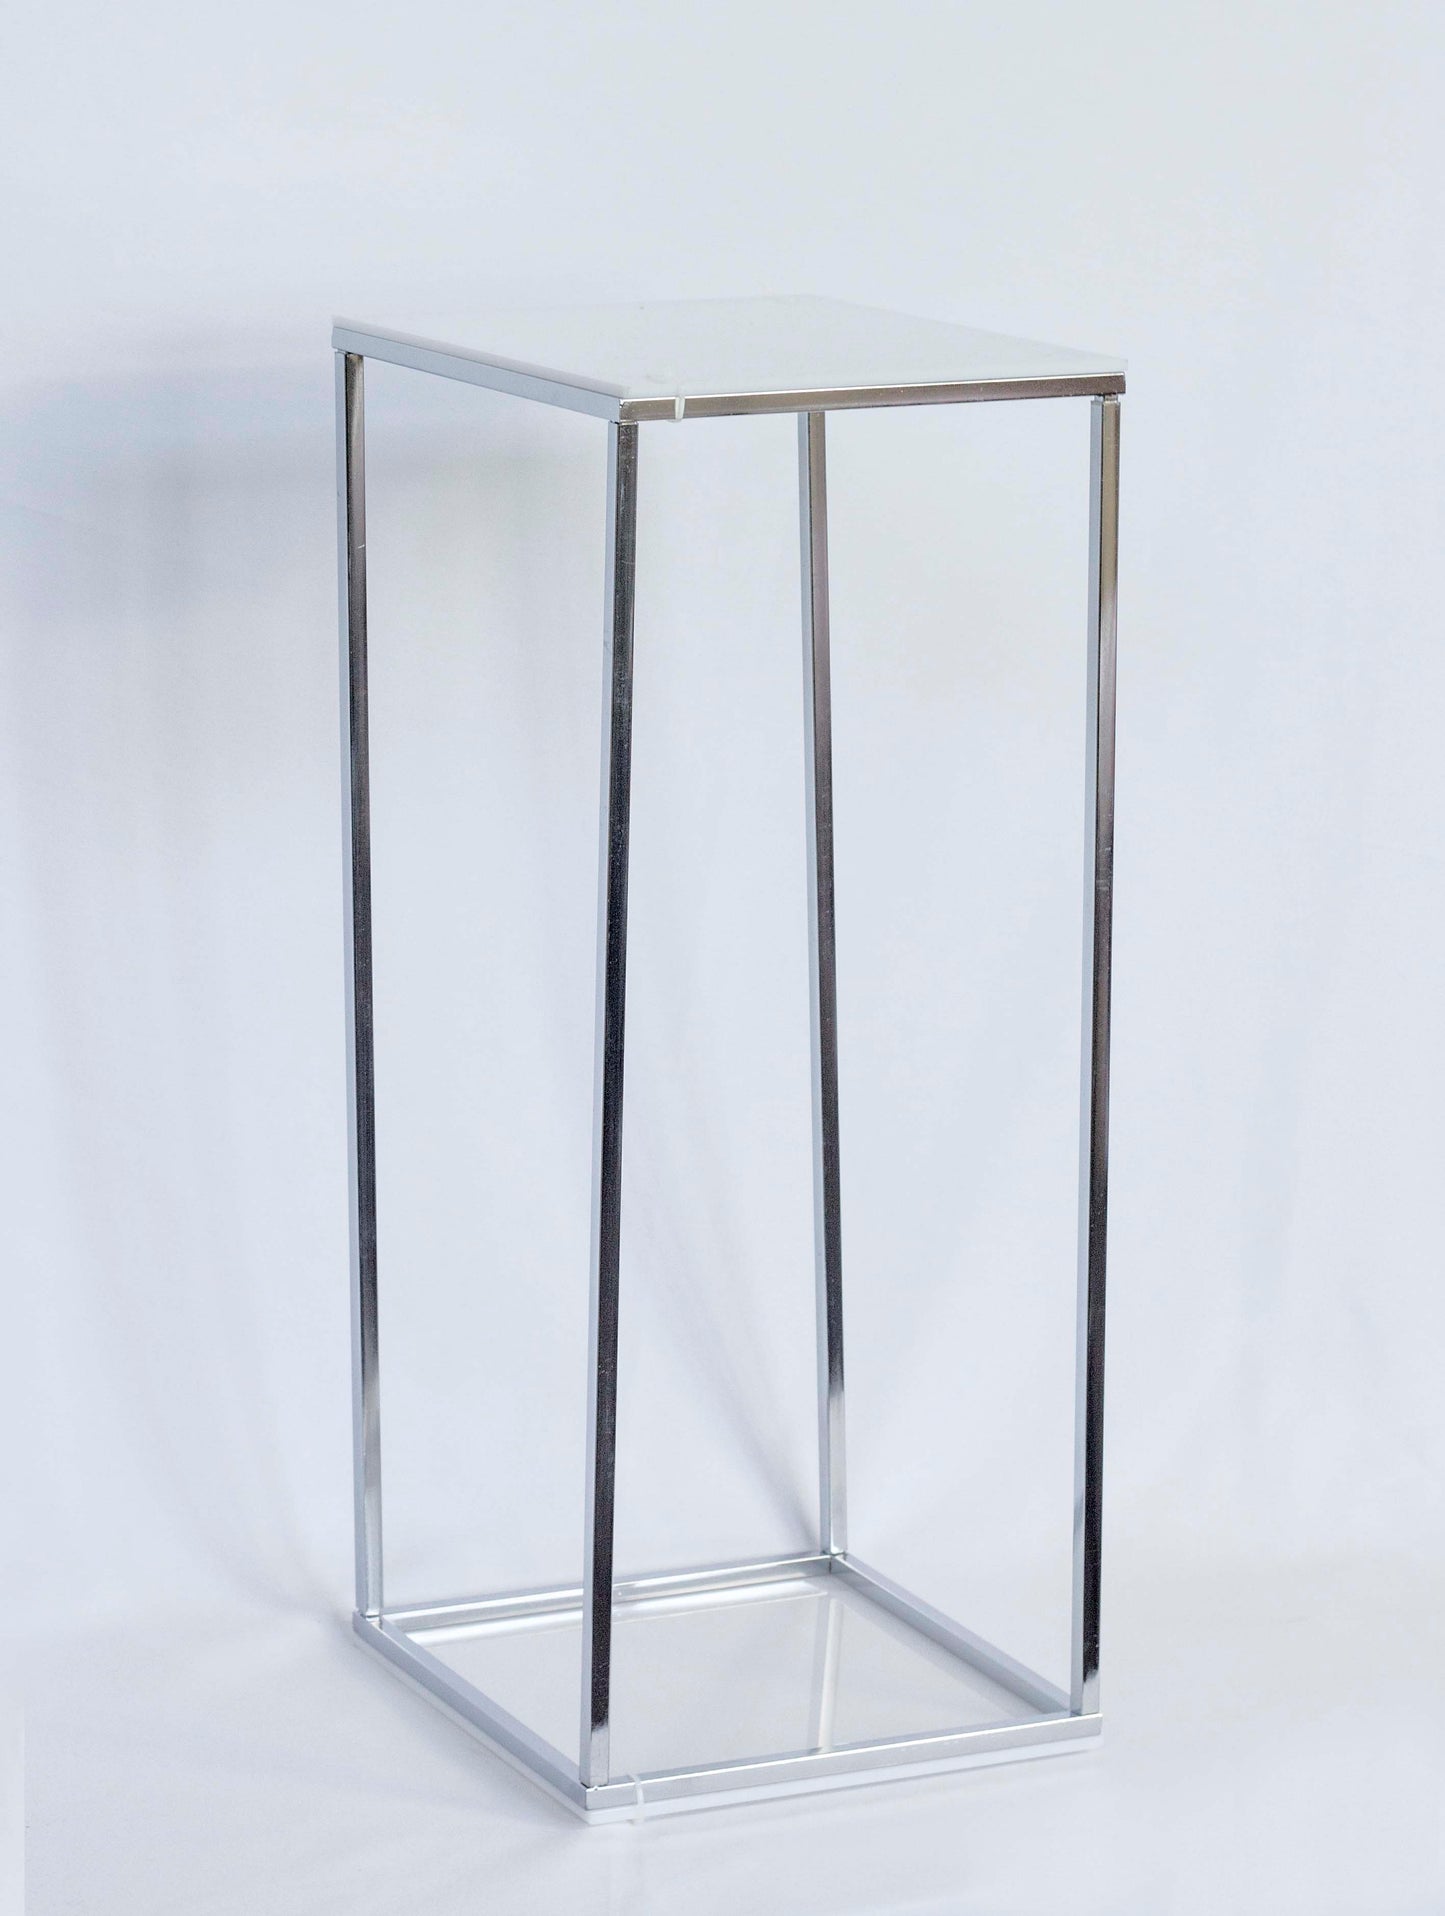 Silver-colored stand for flower arrangements